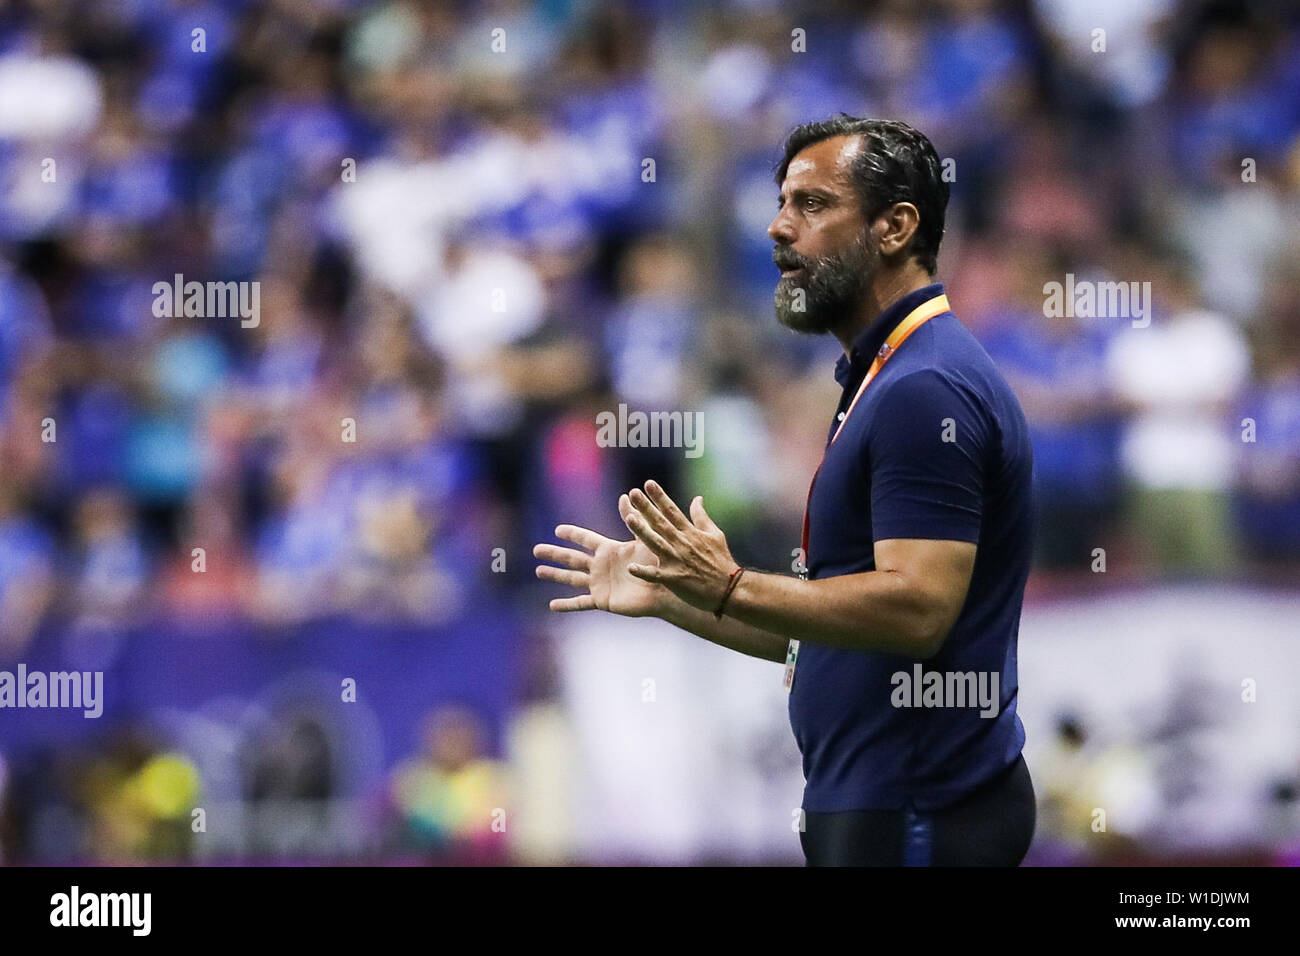 Head coach Quique Sanchez Flores of Shanghai Greenland Shenhua reacts as he watches his players competing against Guangzhou Evergrande Taobao in their 15th round match during the 2019 Chinese Football Association Super League (CSL) in Shanghai, China, 1 July 2019. Guangzhou Evergrande Taobao defeated Shanghai Greenland Shenhua 3-0. Stock Photo